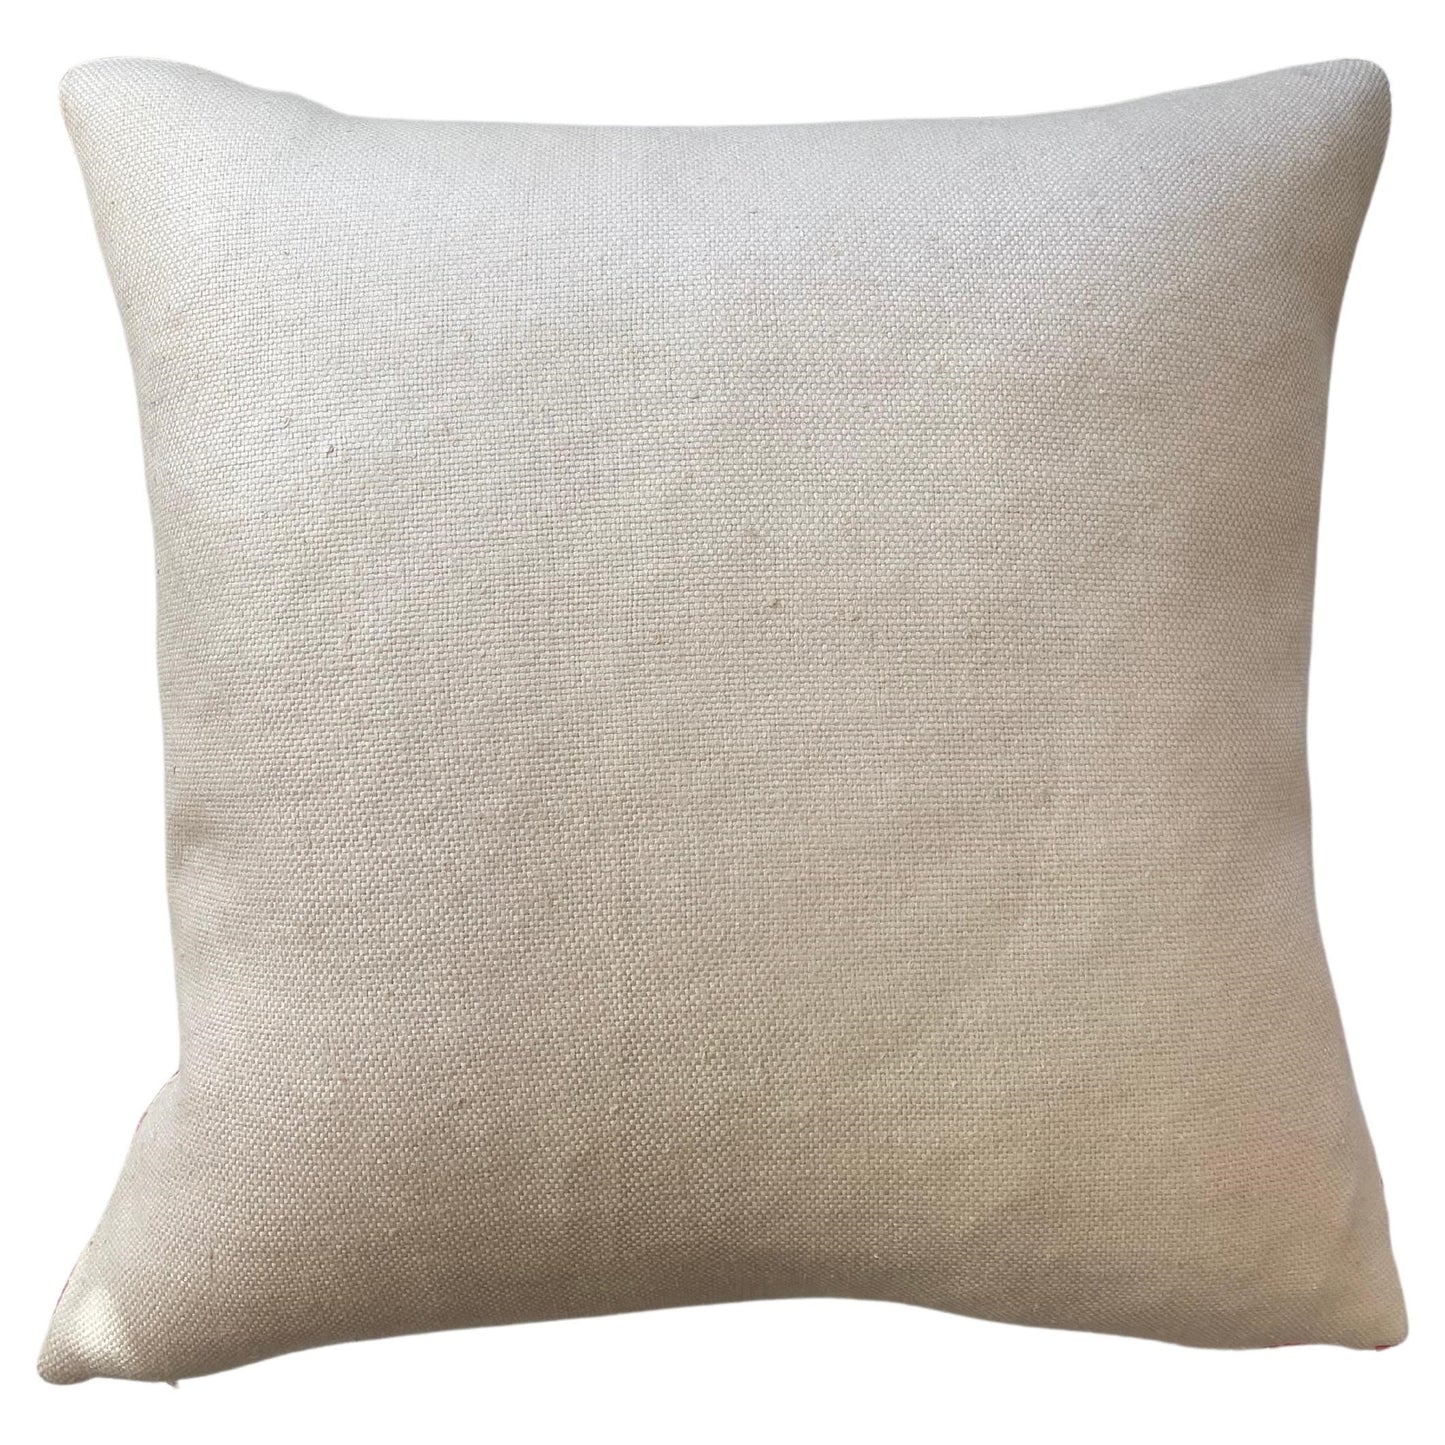 Persimmon Accent Pillow with Plaid and Cream Linen Back